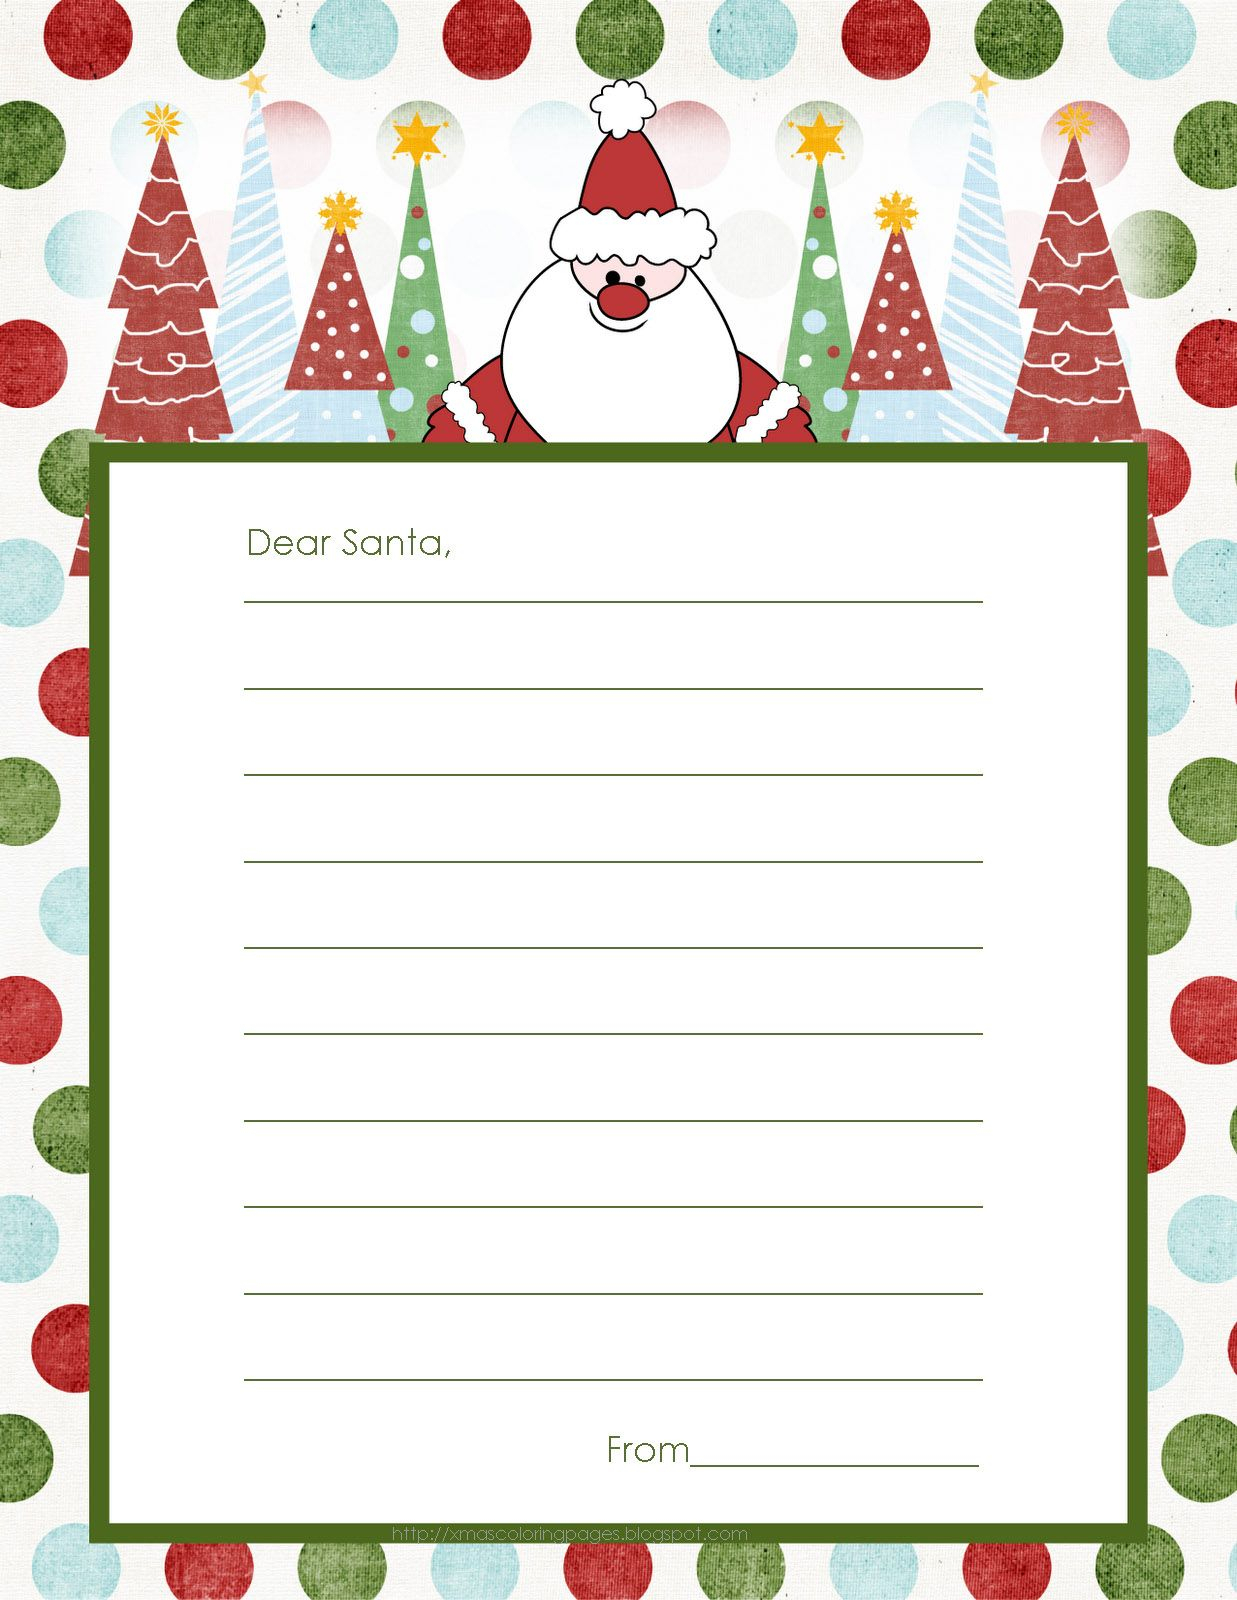 Letter To Santa Template Free |  To Send A Letter To Santa Now - North Pole Stationary Printable Free